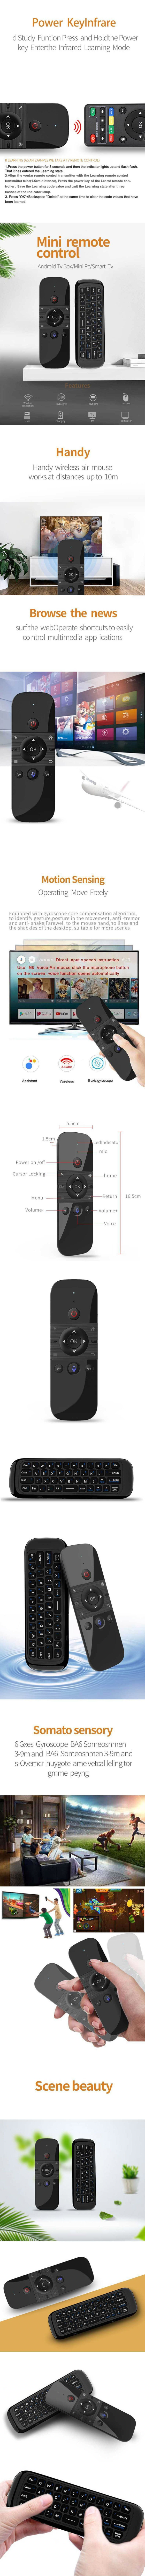 M8-24G-6-Axis-Air-Mouse-Remote-Control-IR-Learning-Per-Android-Tv-Box-Mini-PcSmart-Tv-1656954